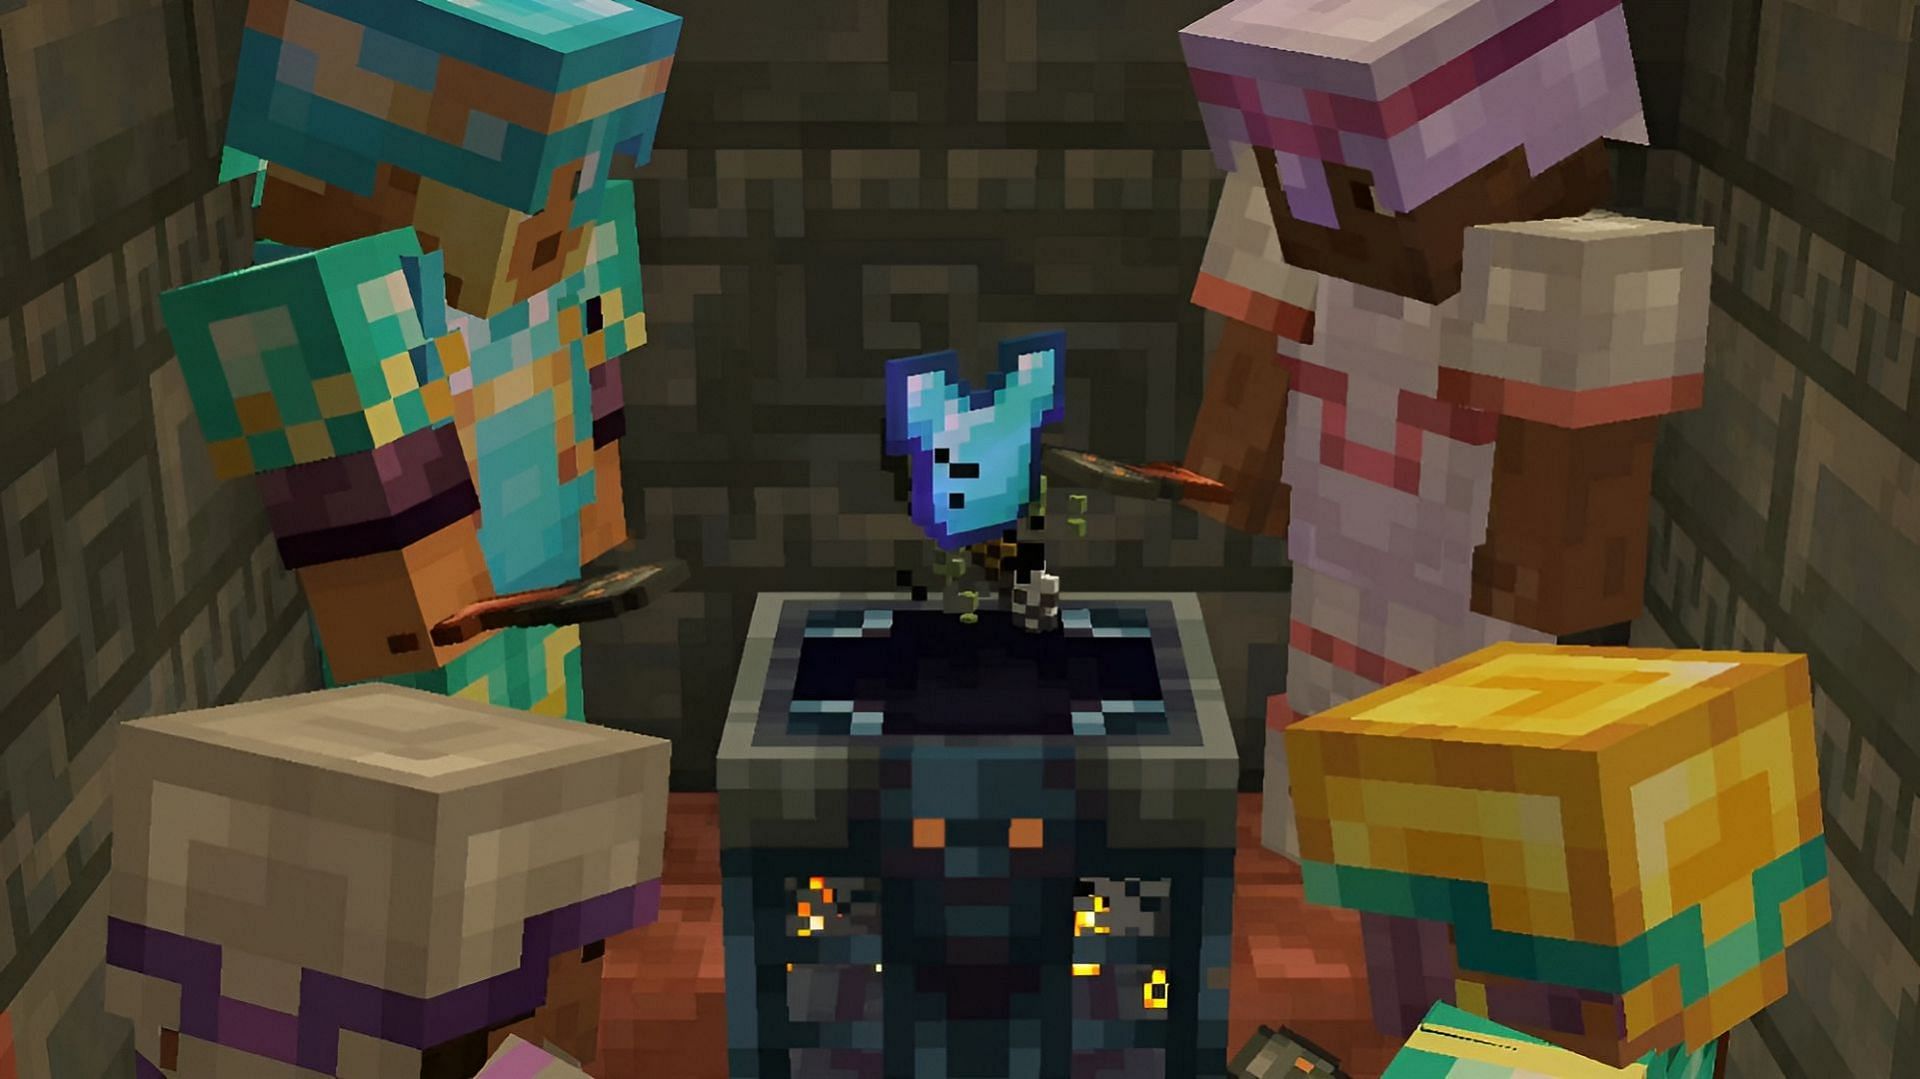 Players open a vault in a trial chamber in 1.21 Tricky Trials (Image via Mojang)